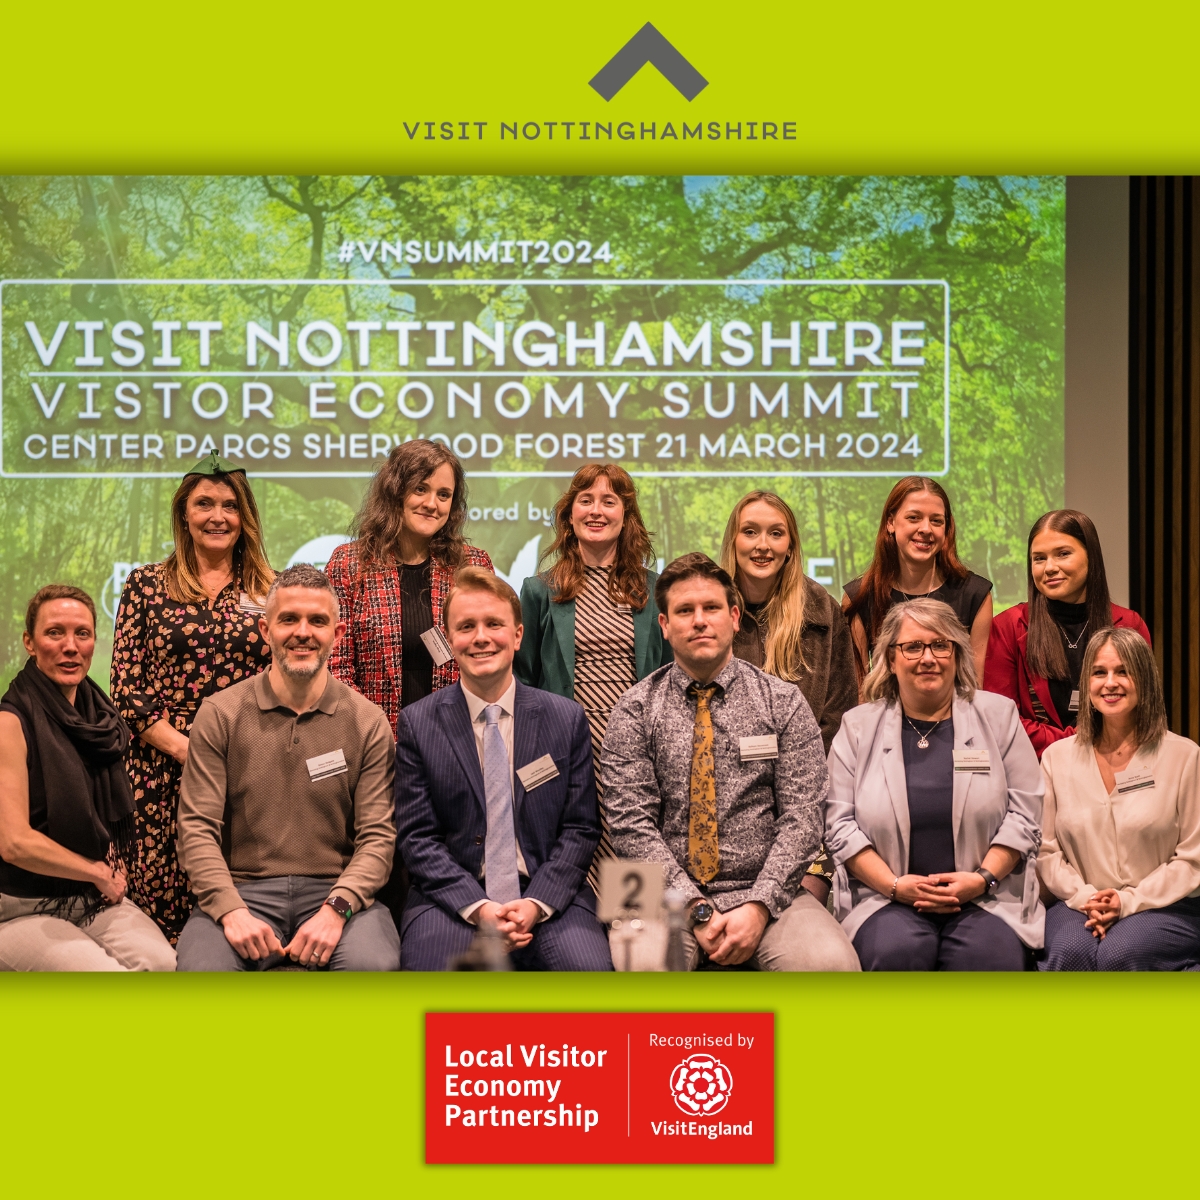 1/3 This week, @VisitNotts (our visitor economy team) have been awarded the Local Visitor Economy Partnership (LVEP) status, marking a significant milestone in our ongoing commitment to the development and growth of #Nottingham and #Nottinghamshire’s visitor economy!